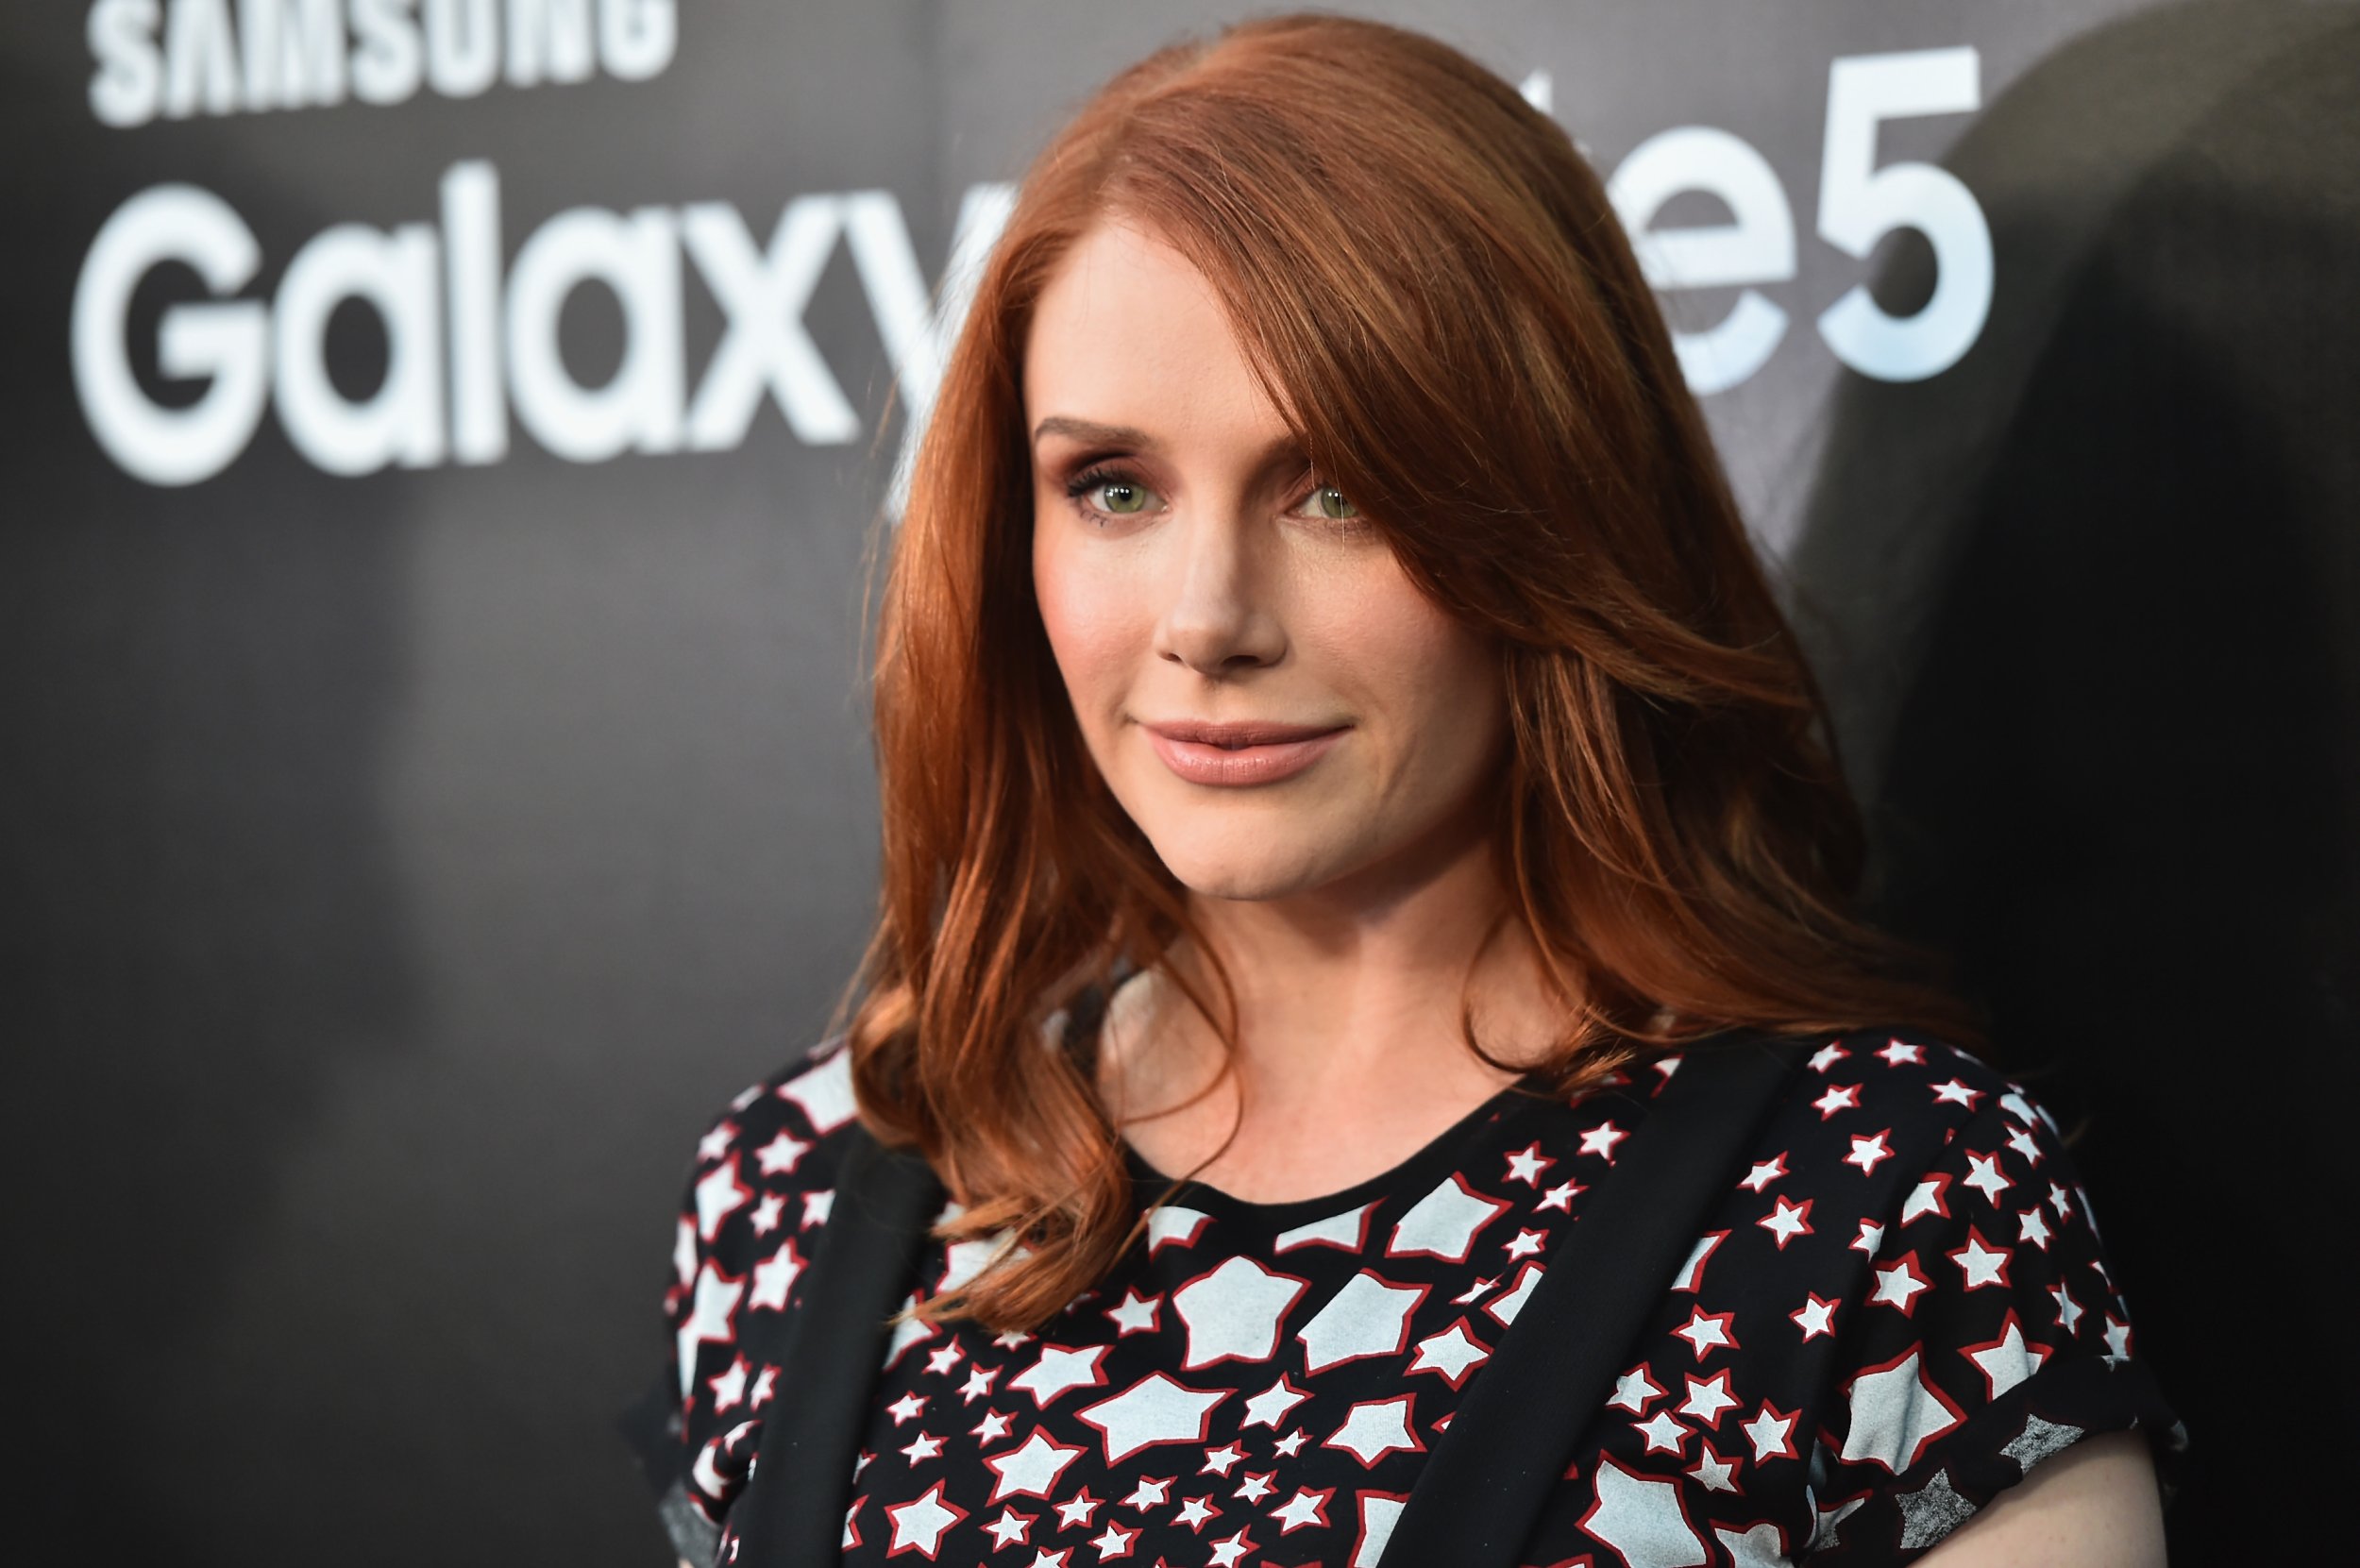 Jurassic World 2' Cast Member Bryce Dallas Howard Reveals Details About Her  Character In Upcoming Sequel